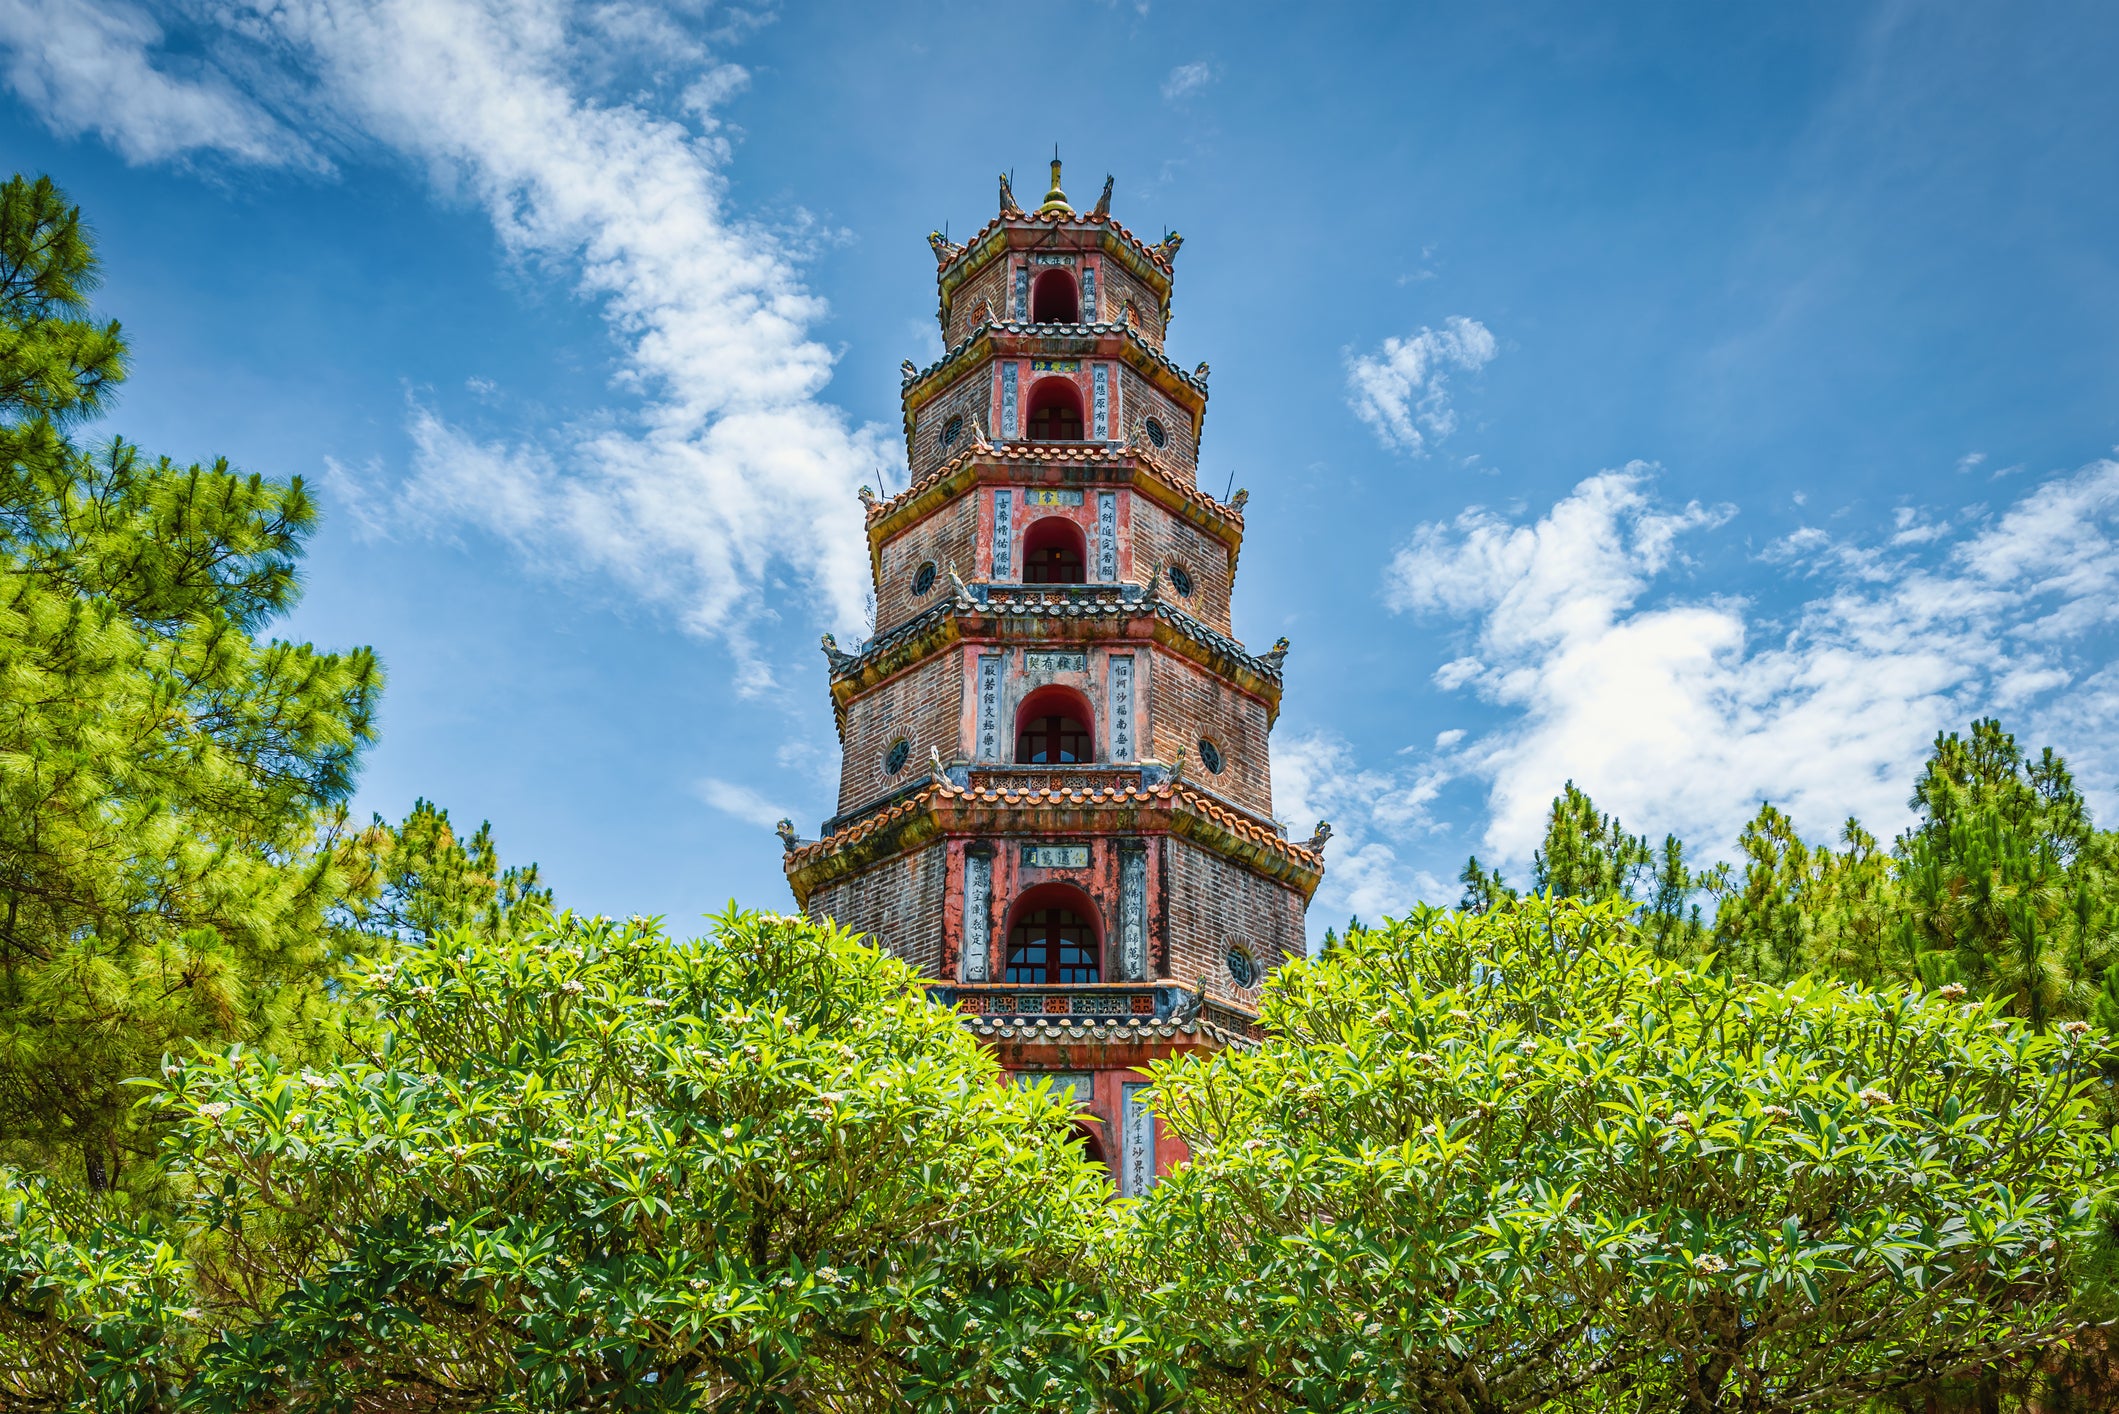 Hue, Vietnam was once the seat of Nguyen Dynasty emperors